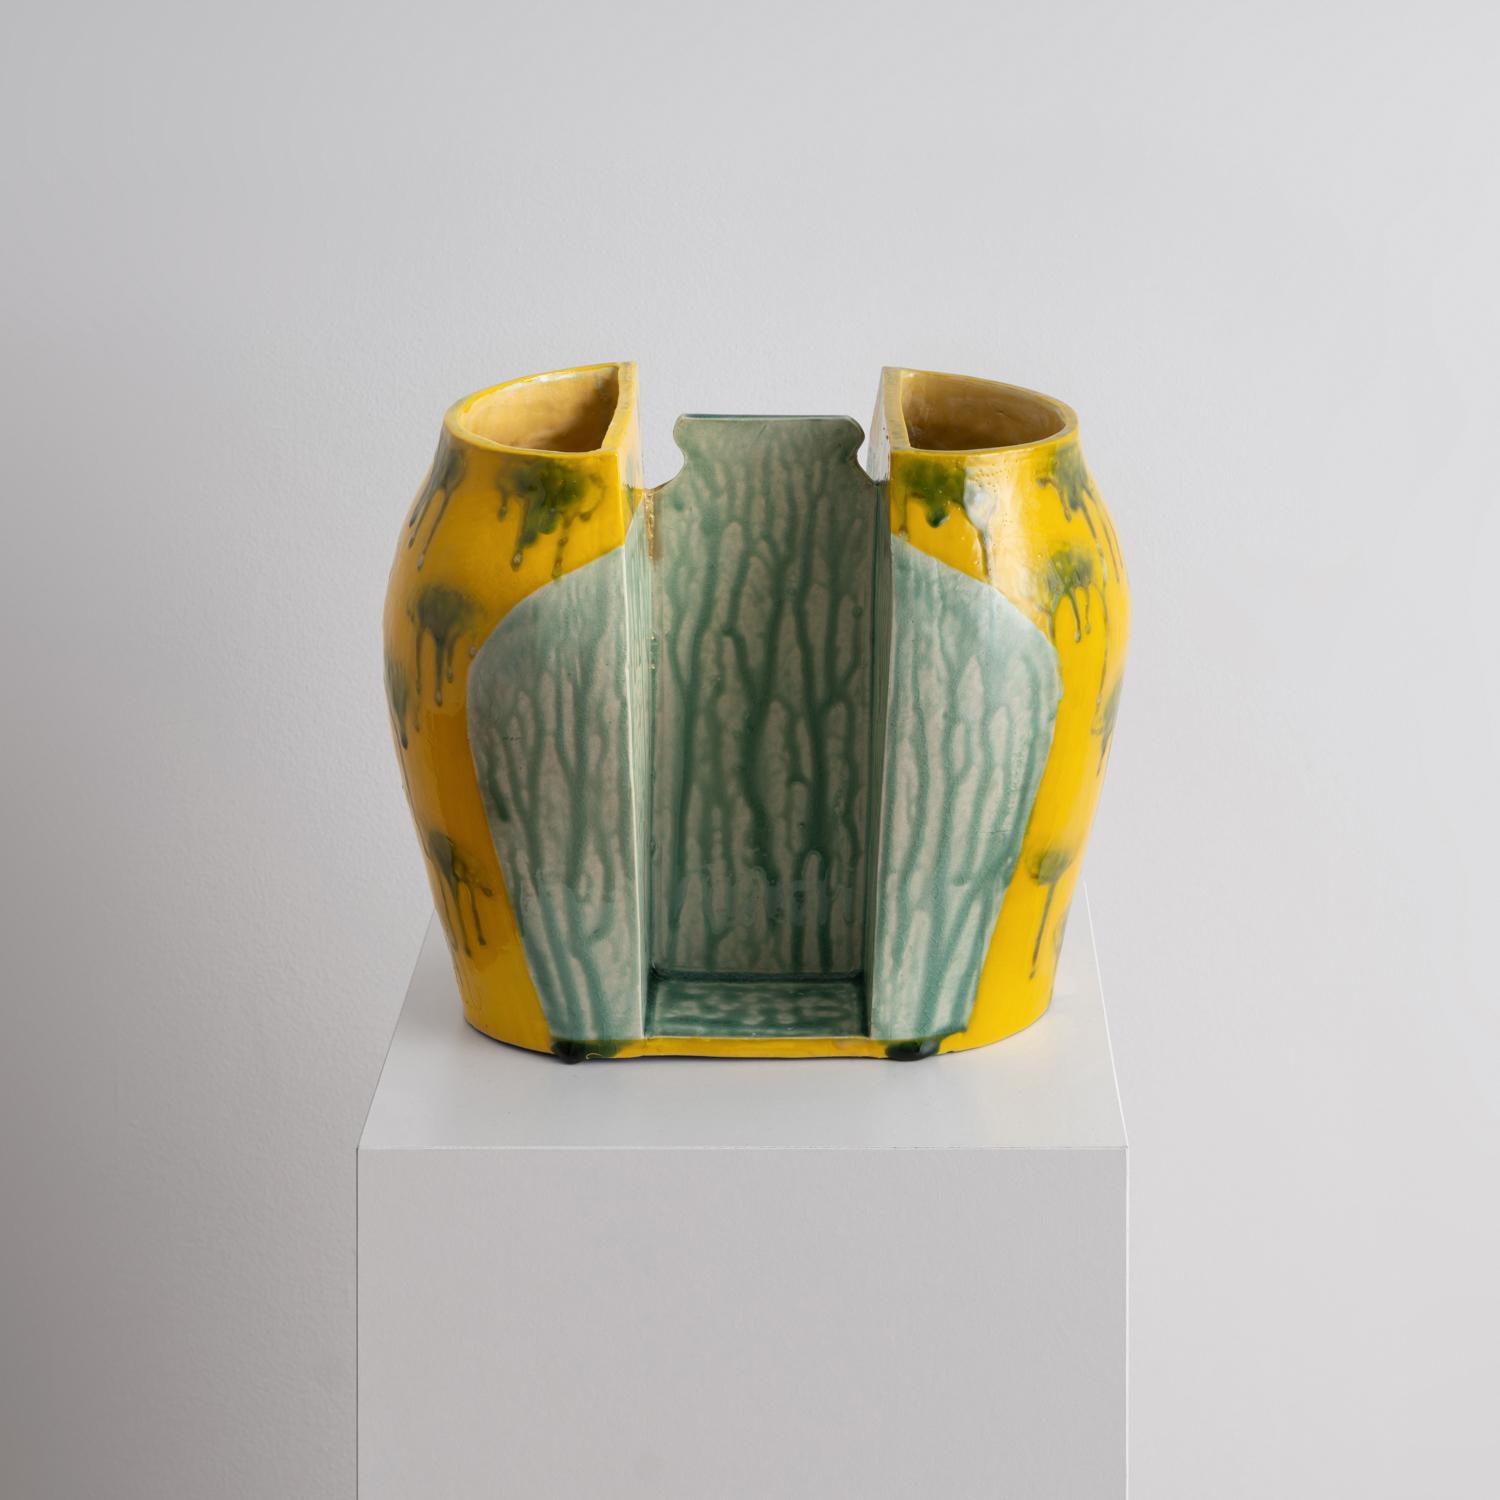 Vibrant, contemporary ceramic sculpture by Los Angeles-based artist and curator Jenny Hata Blumenfield. A gorgeous vessel that is an energetic accent to any room.

A vibrant, sunny yellow glaze provides a background for drippy bursts of matcha